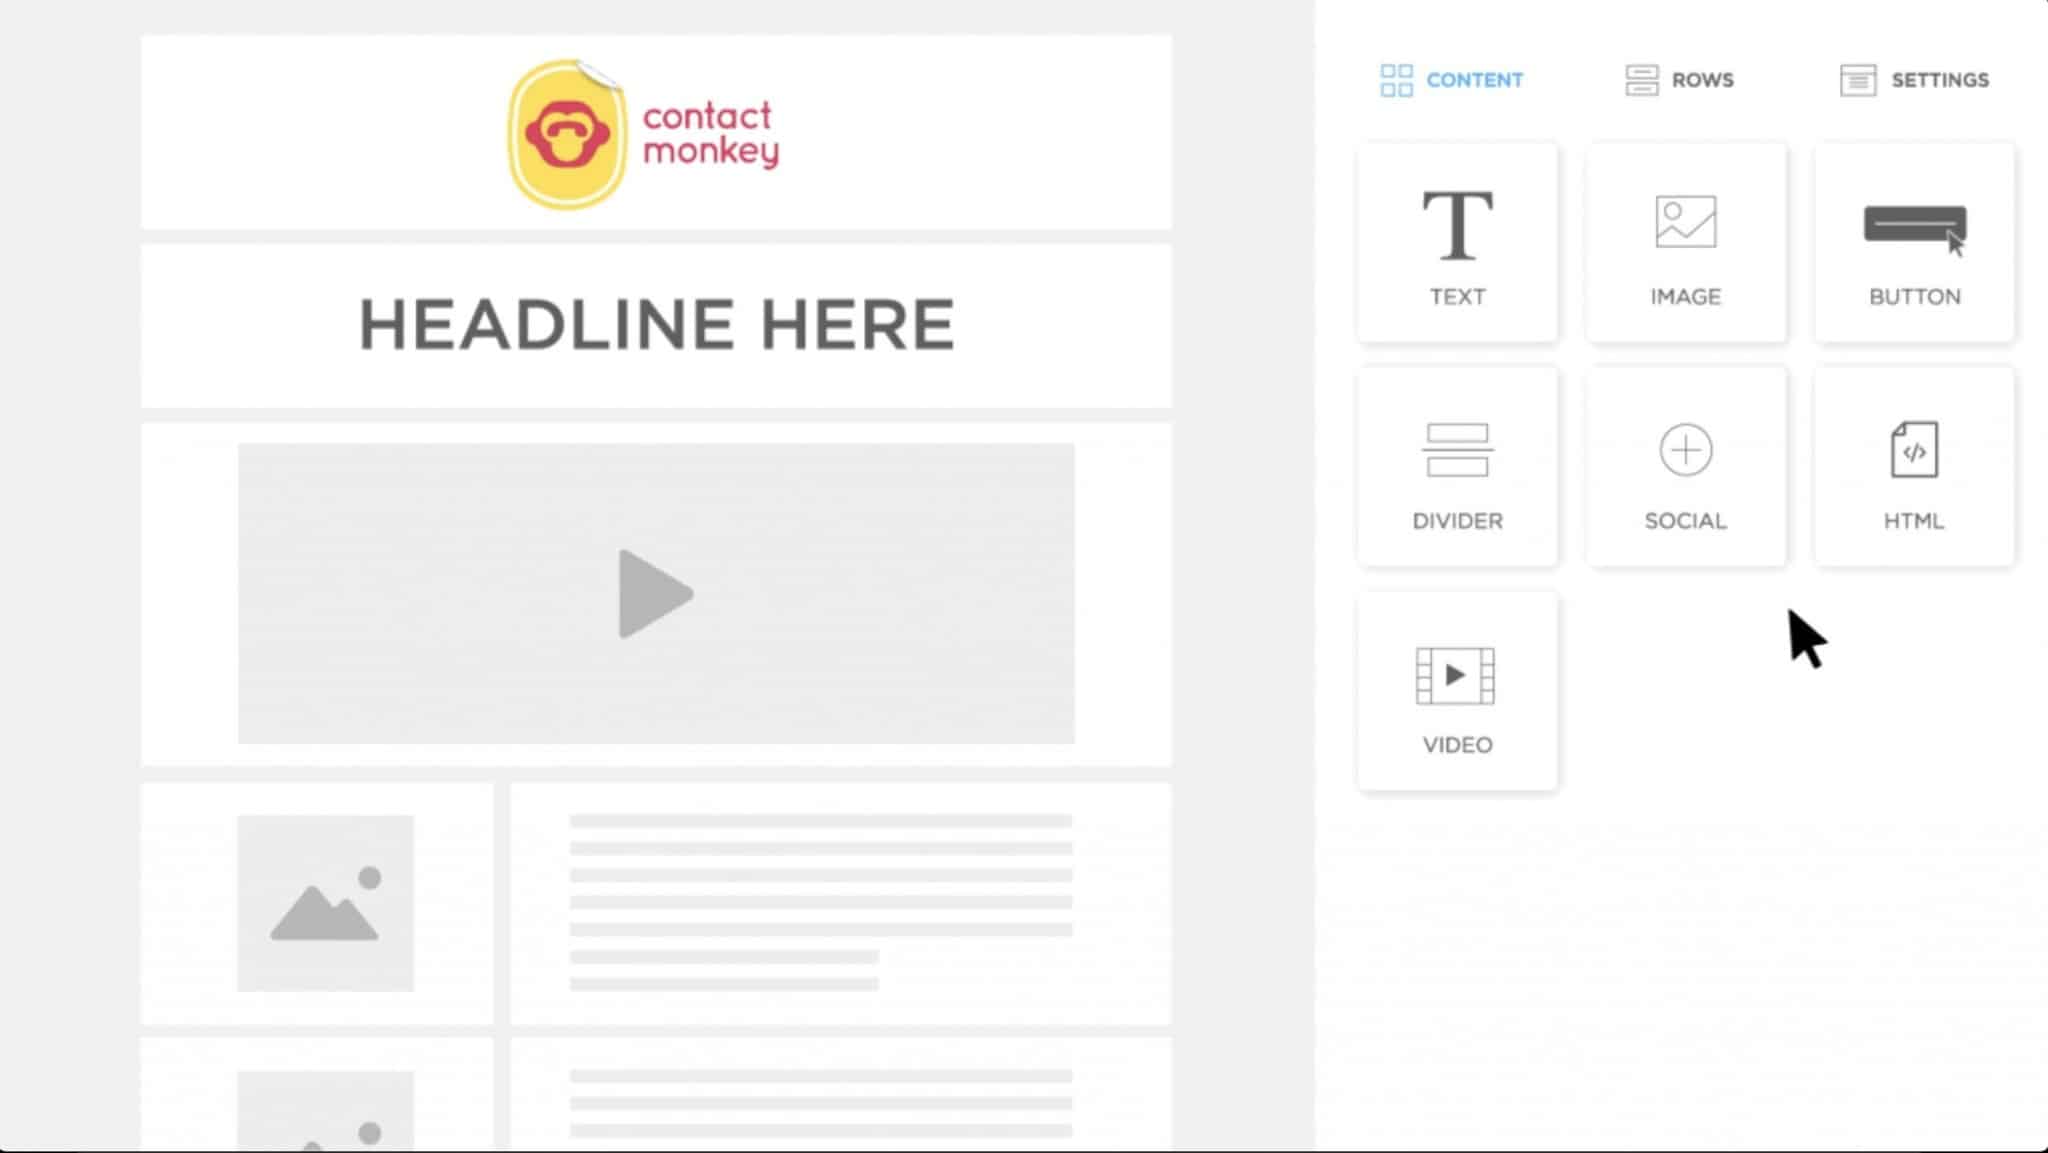 Screenshot of video content within an email template created with ContactMonkey's email template builder.